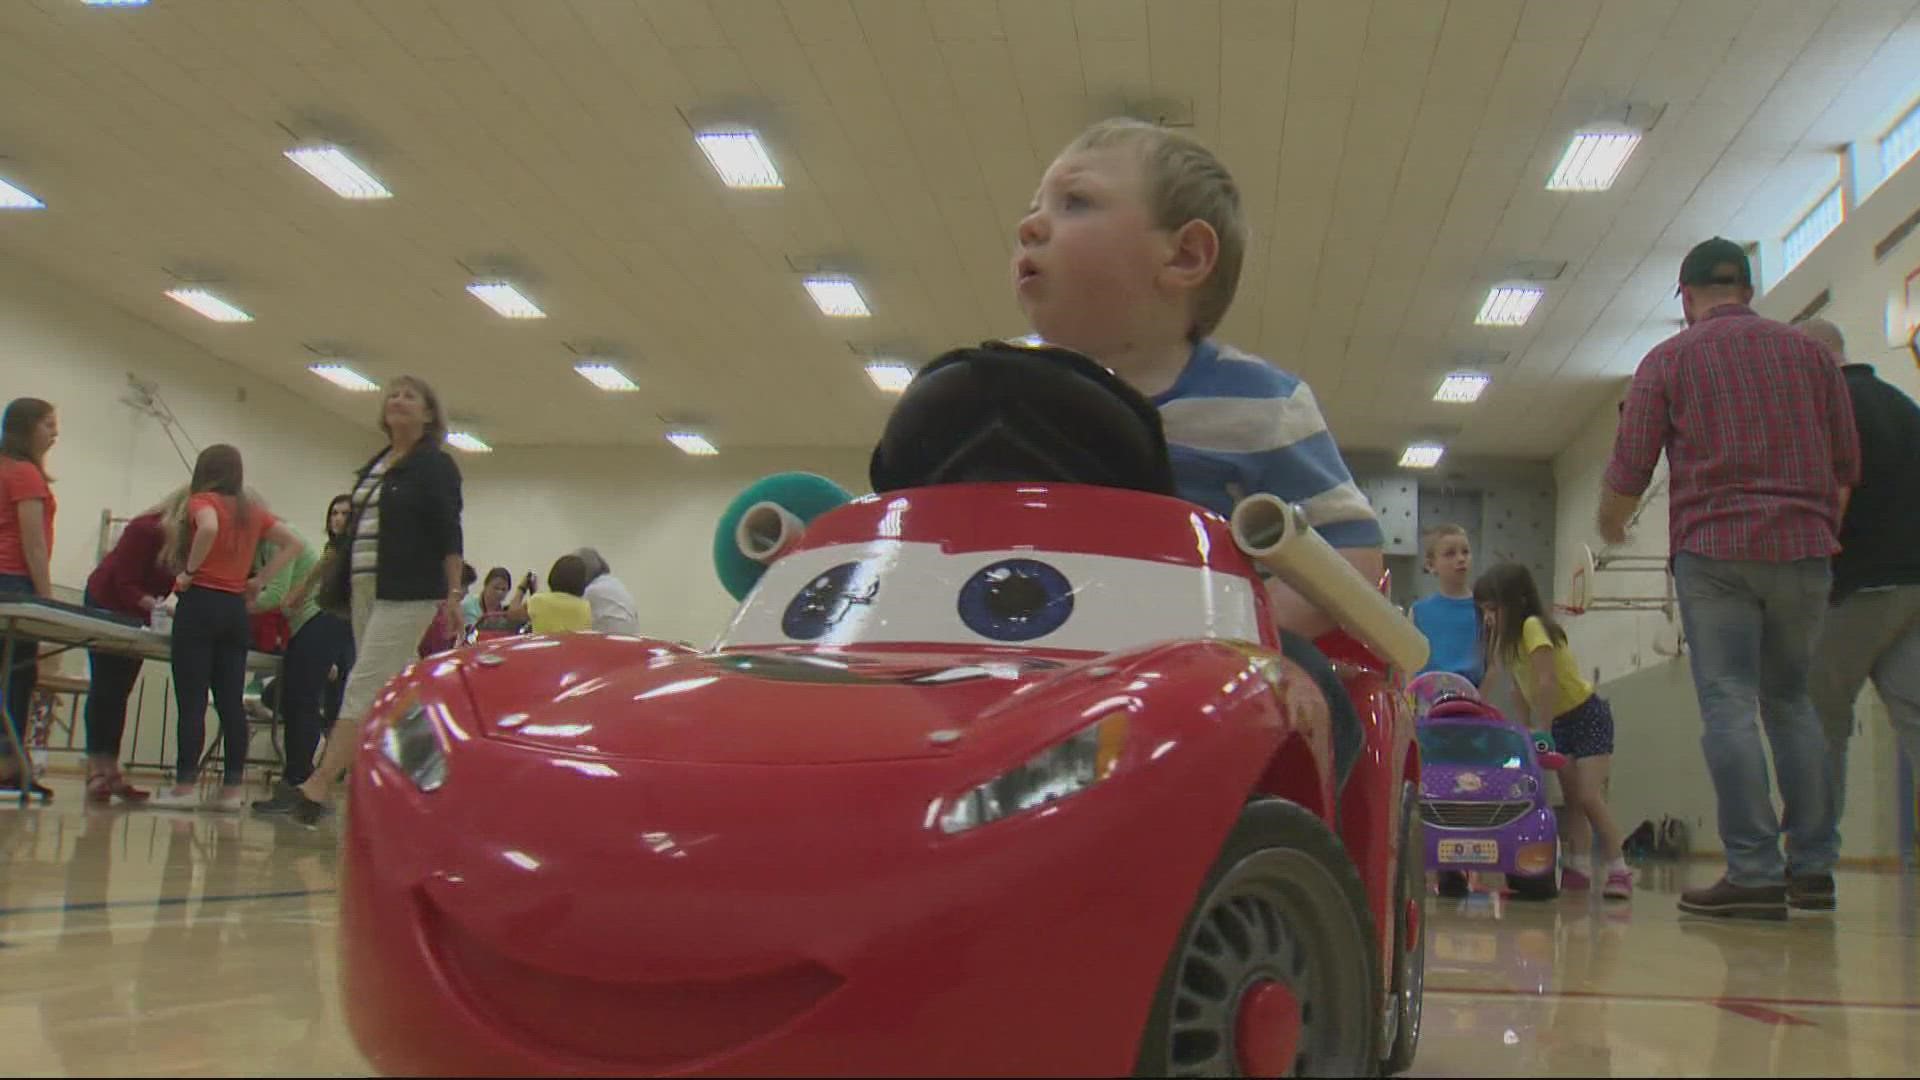 The nonprofit adapts toys of all kinds for kids with disabilities. It’s a local chapter of a national organization run by volunteers.